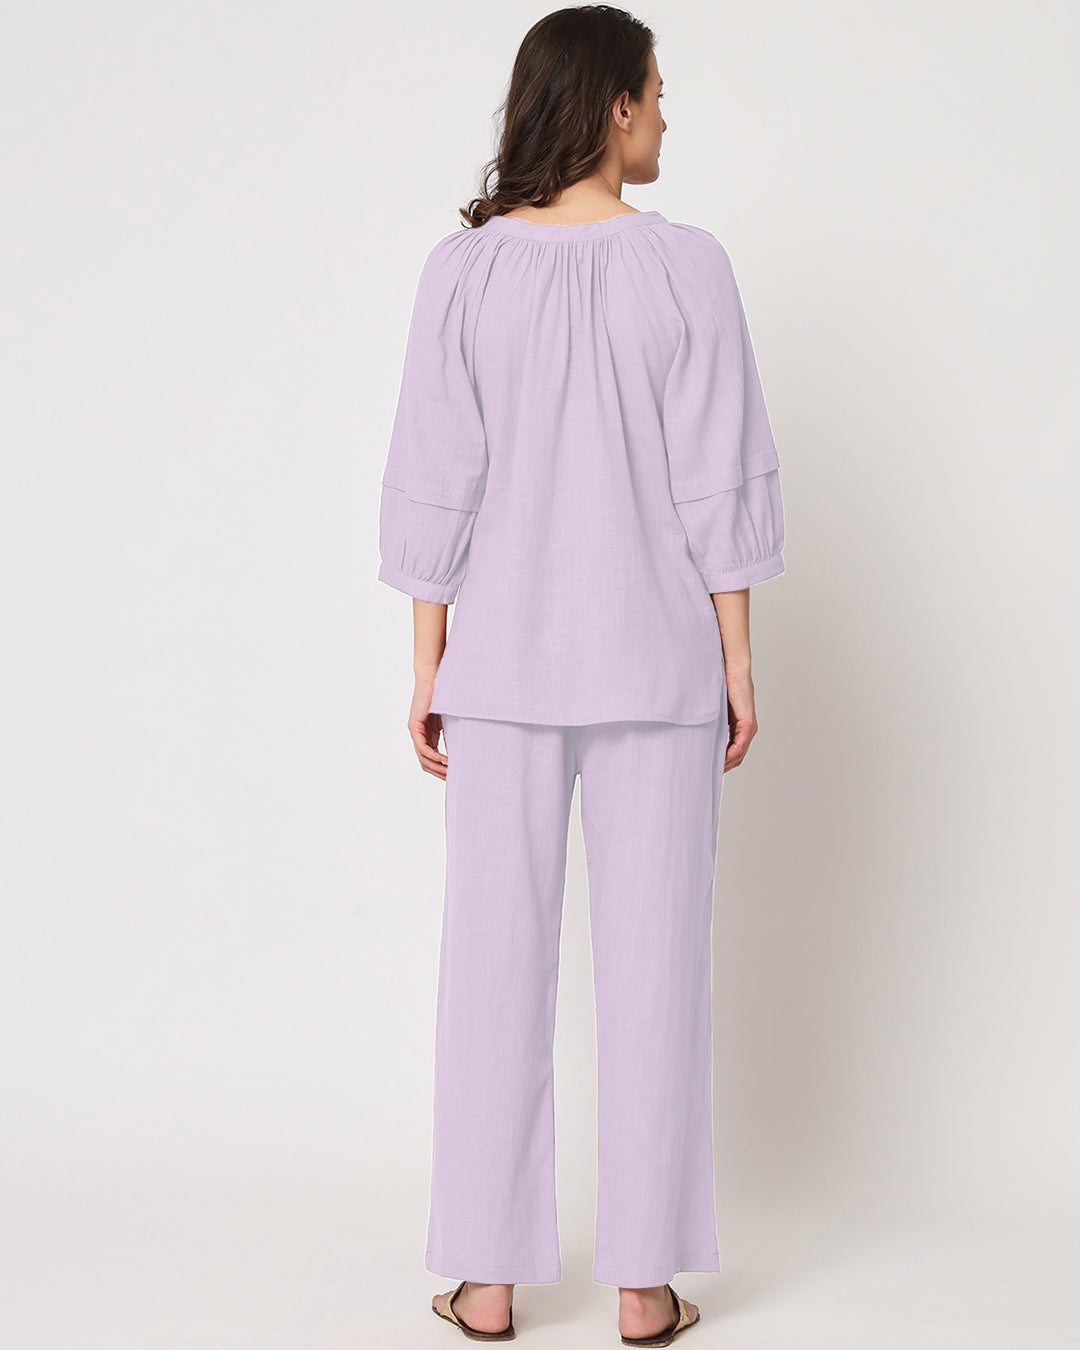 Lilac Button Neck Solid Top (Without Bottoms)